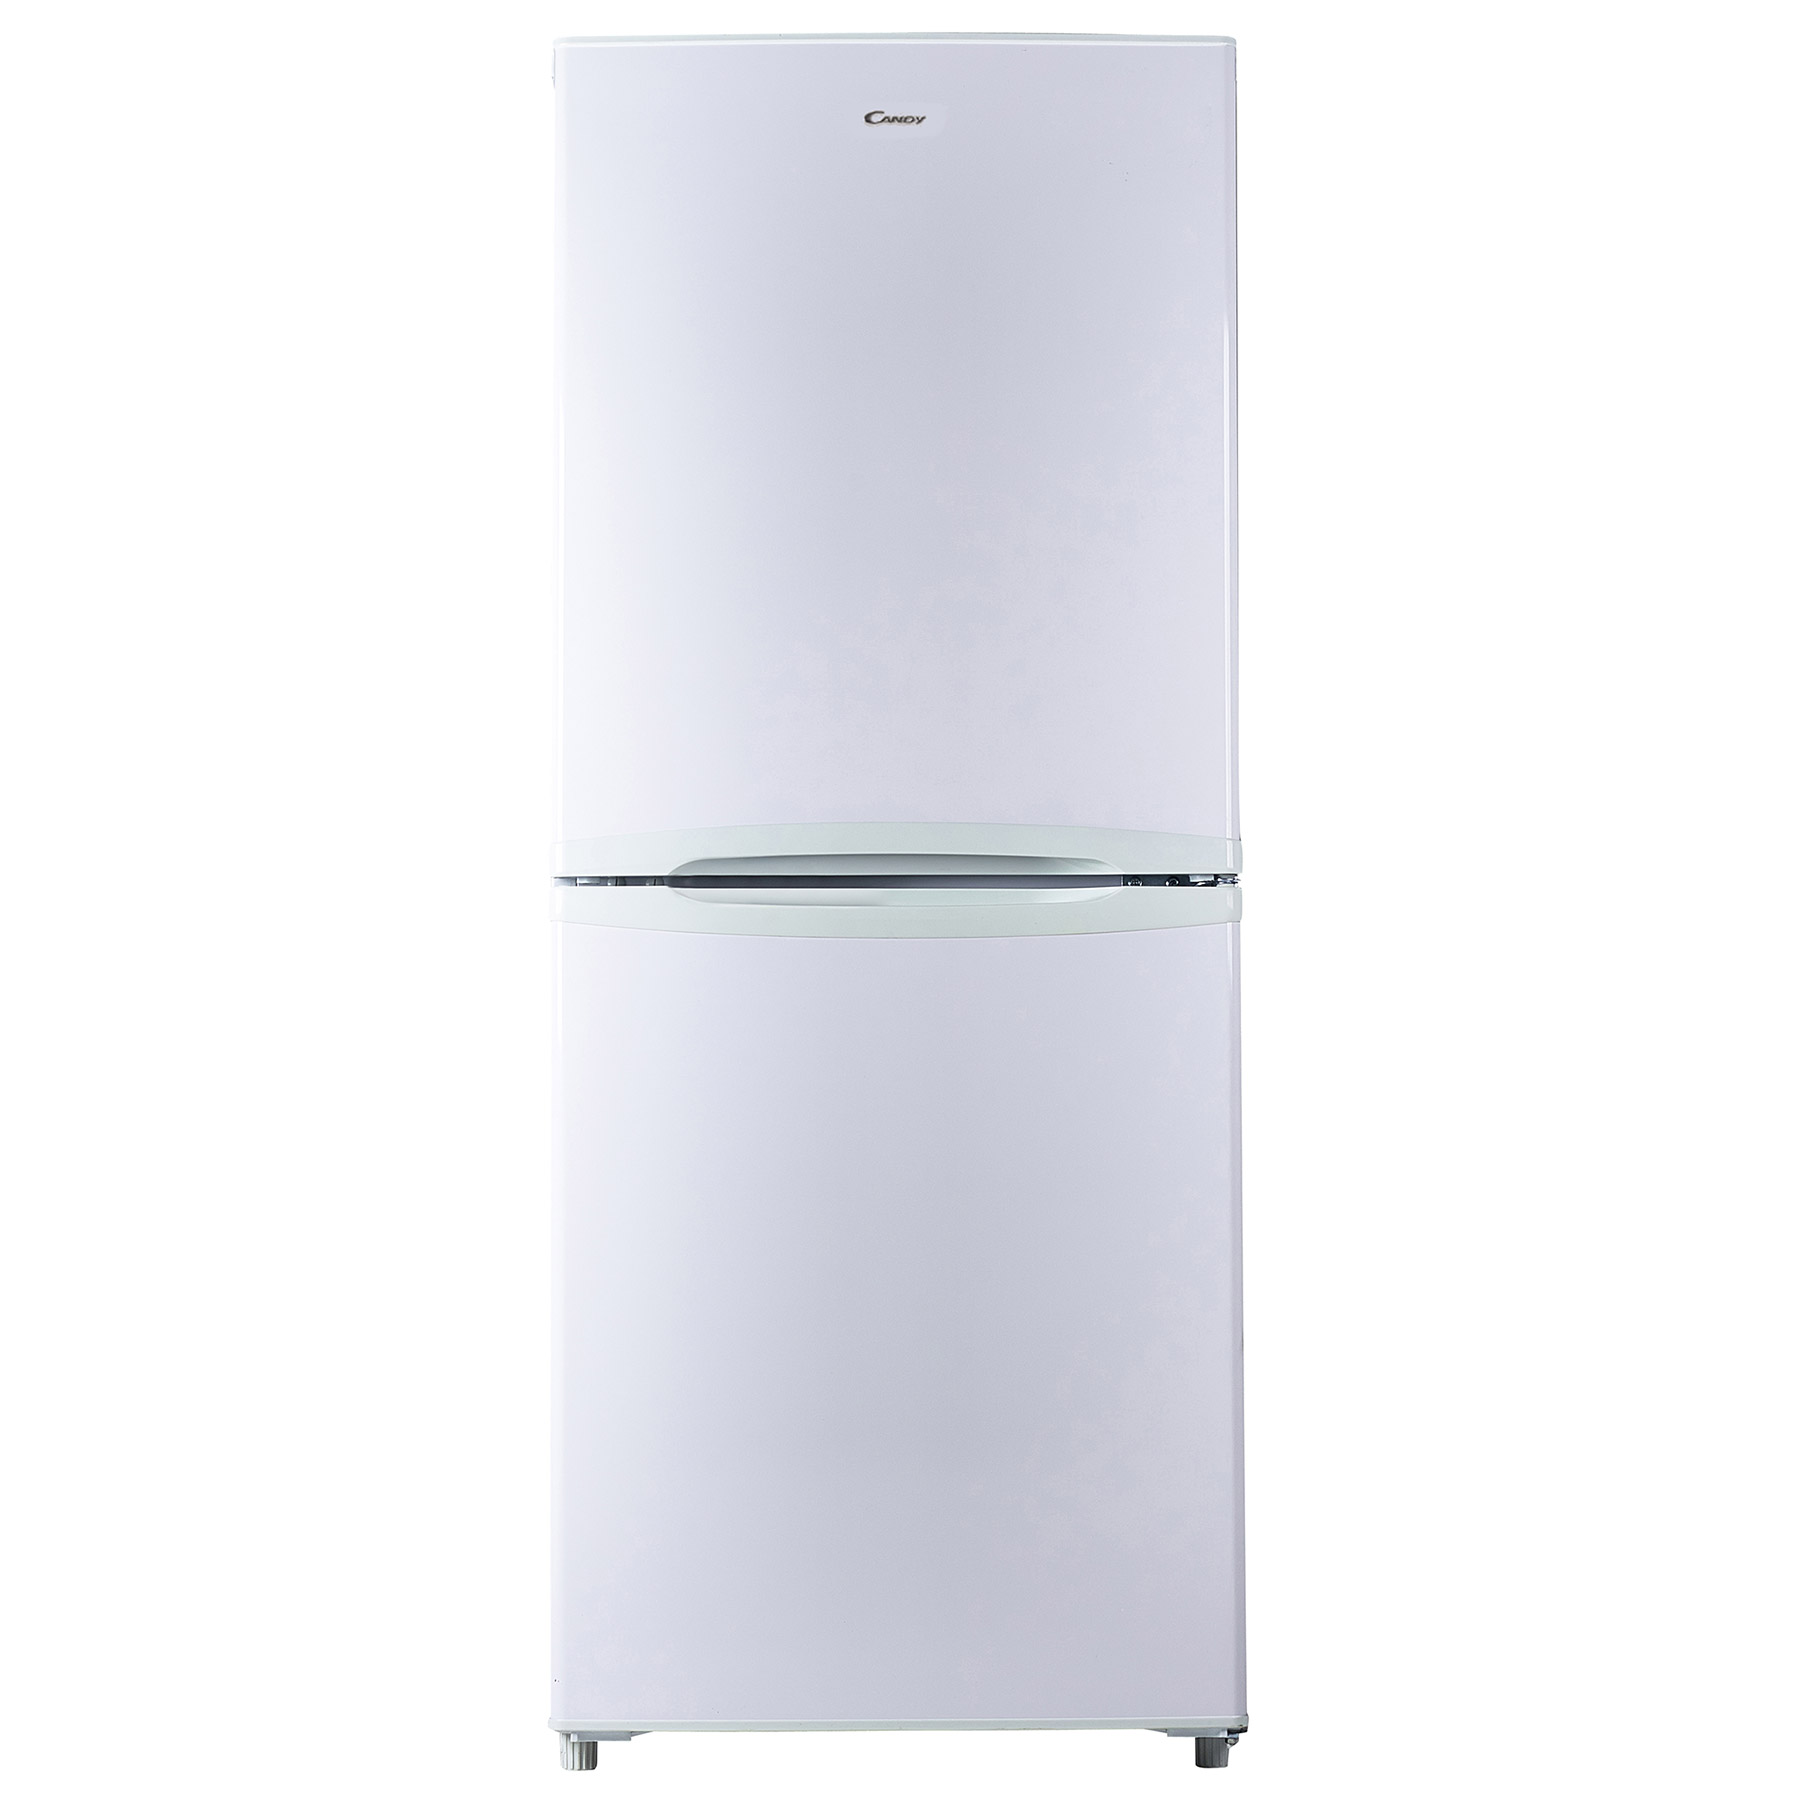 Candy CSC135WEKN 55cm Fridge Freezer in White 1 36m F Rated 114 71L